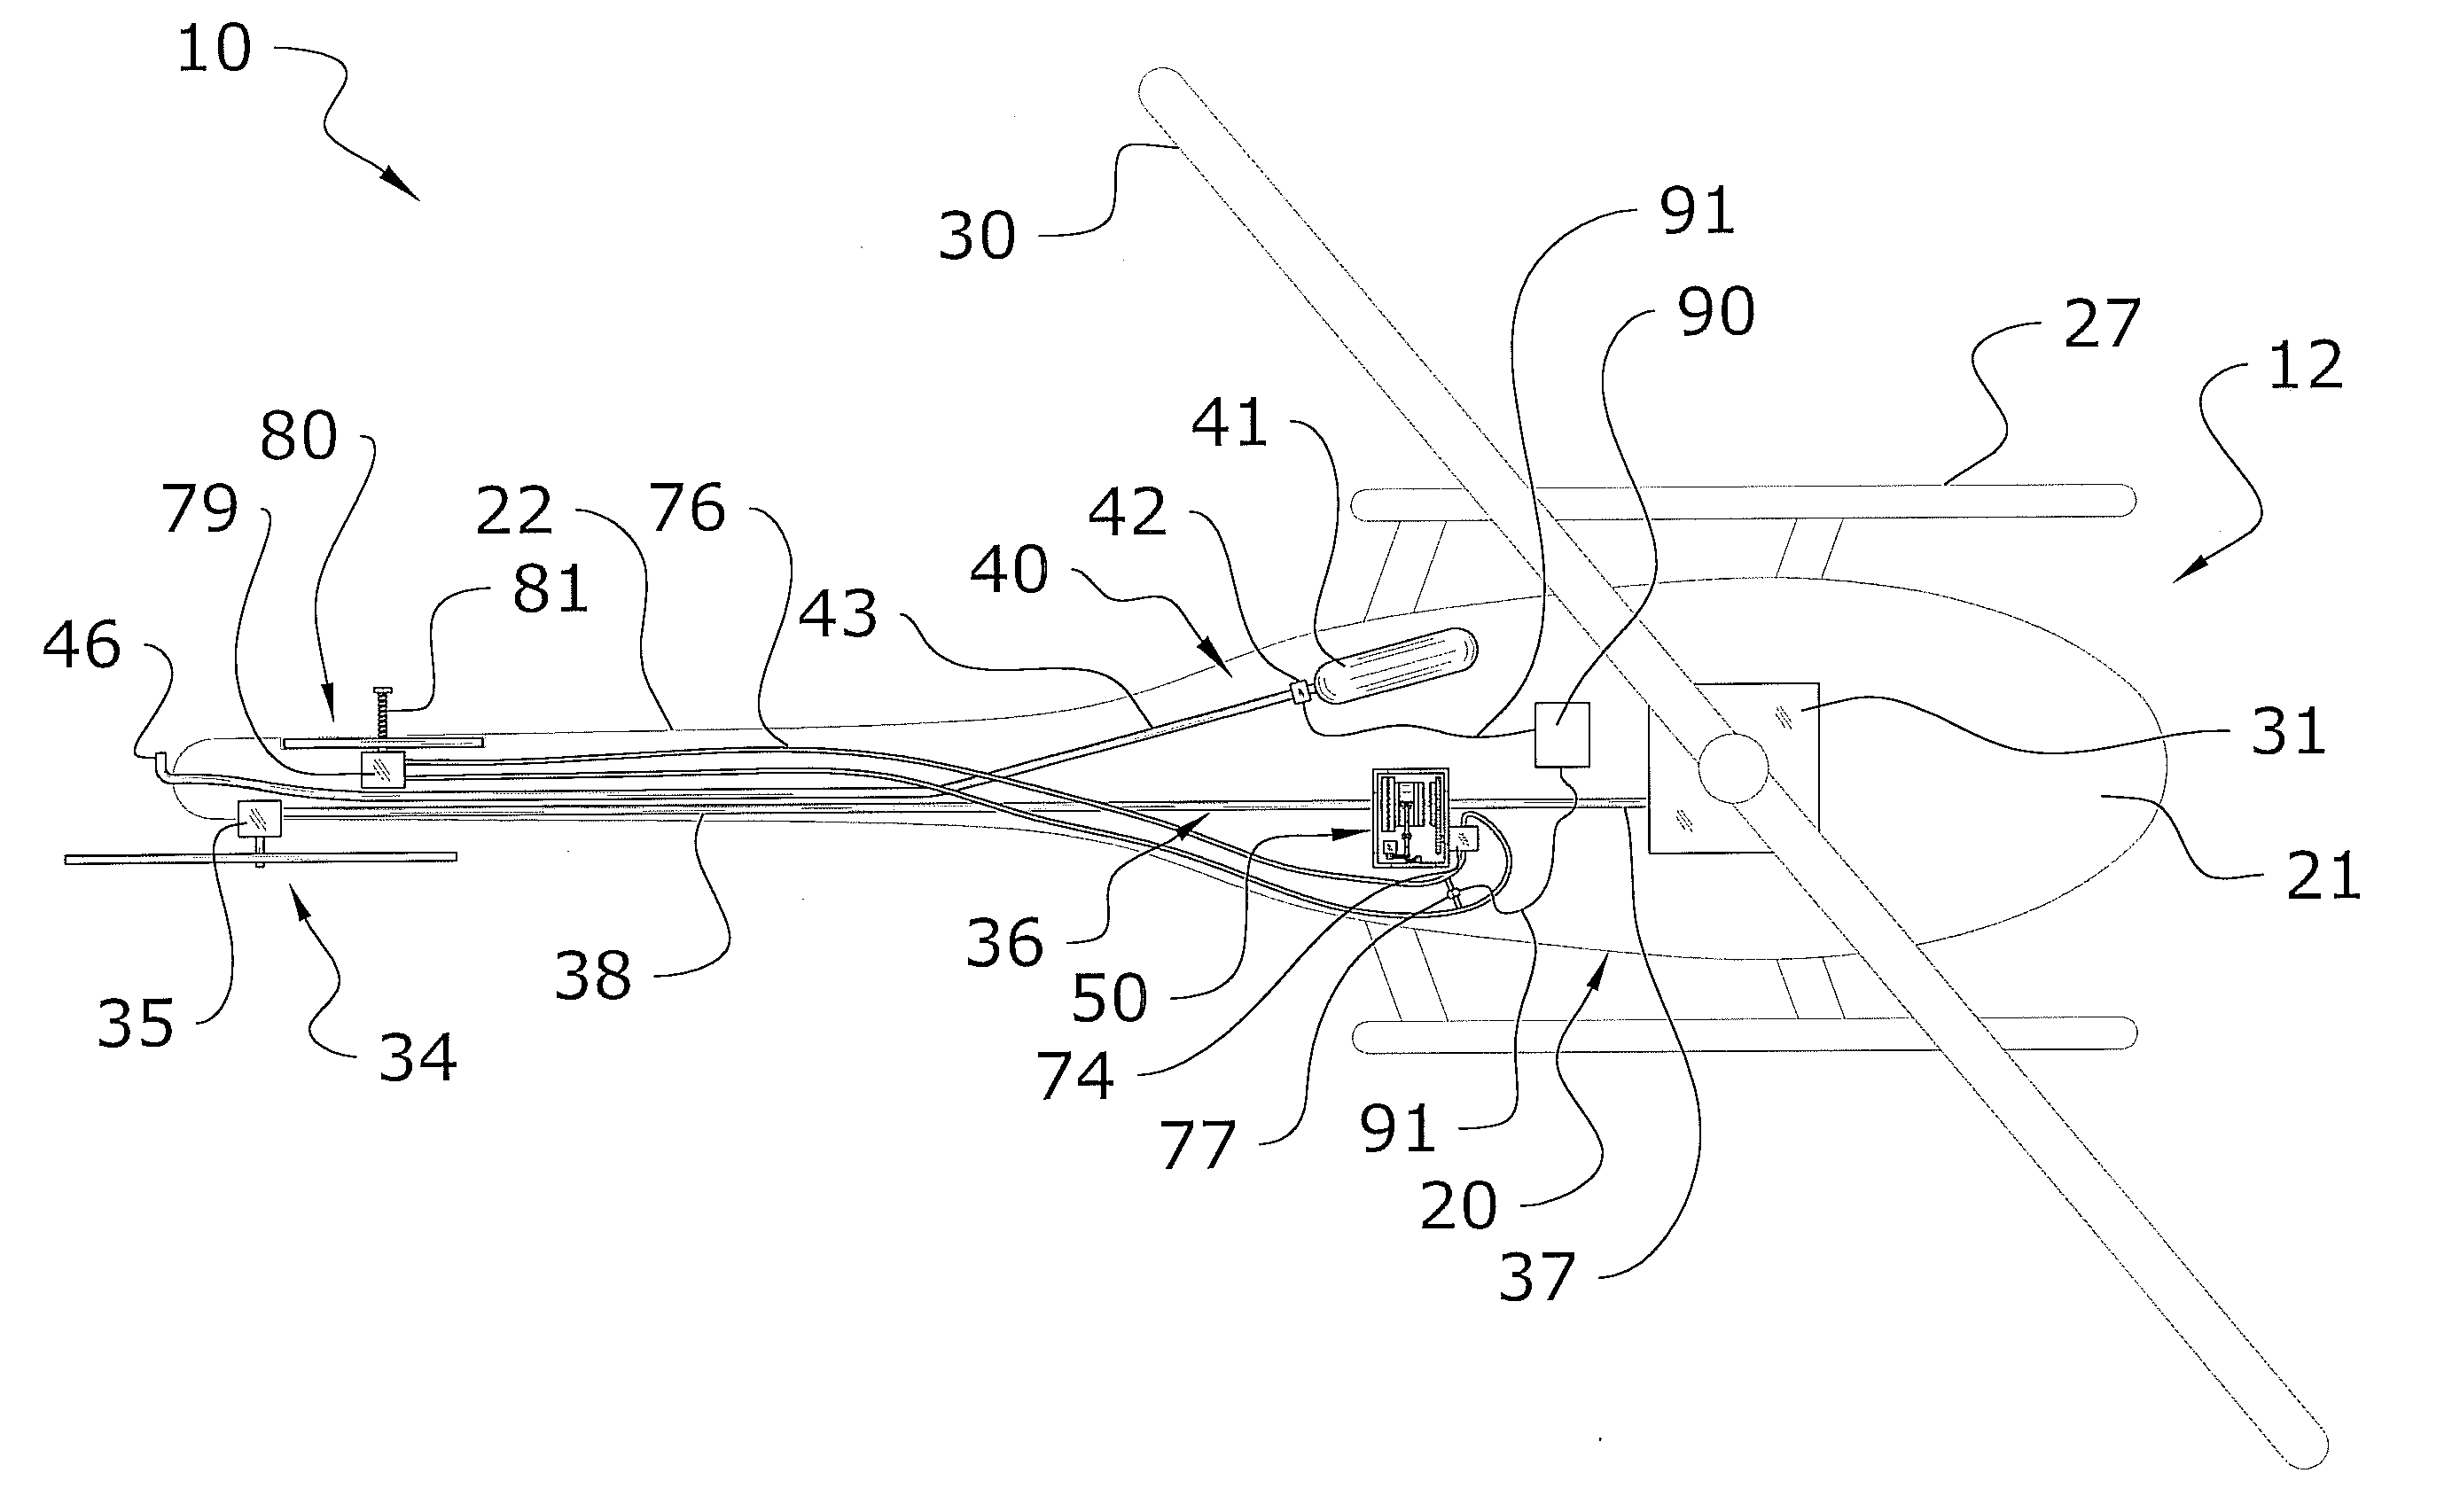 Helicopter Auxilary Anti-Torque System